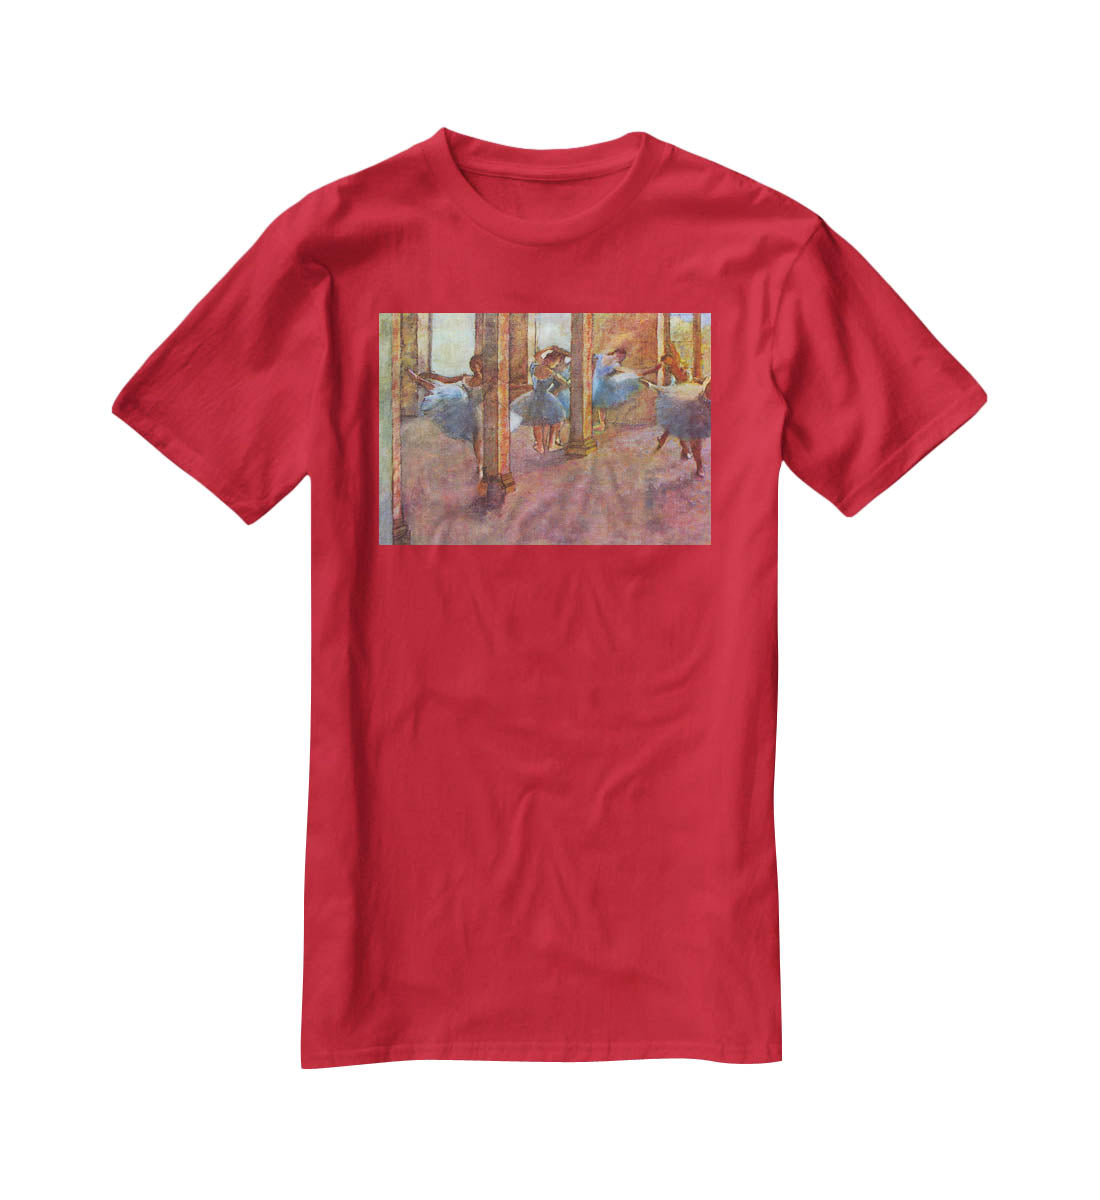 Dancers in the Foyer by Degas T-Shirt - Canvas Art Rocks - 4